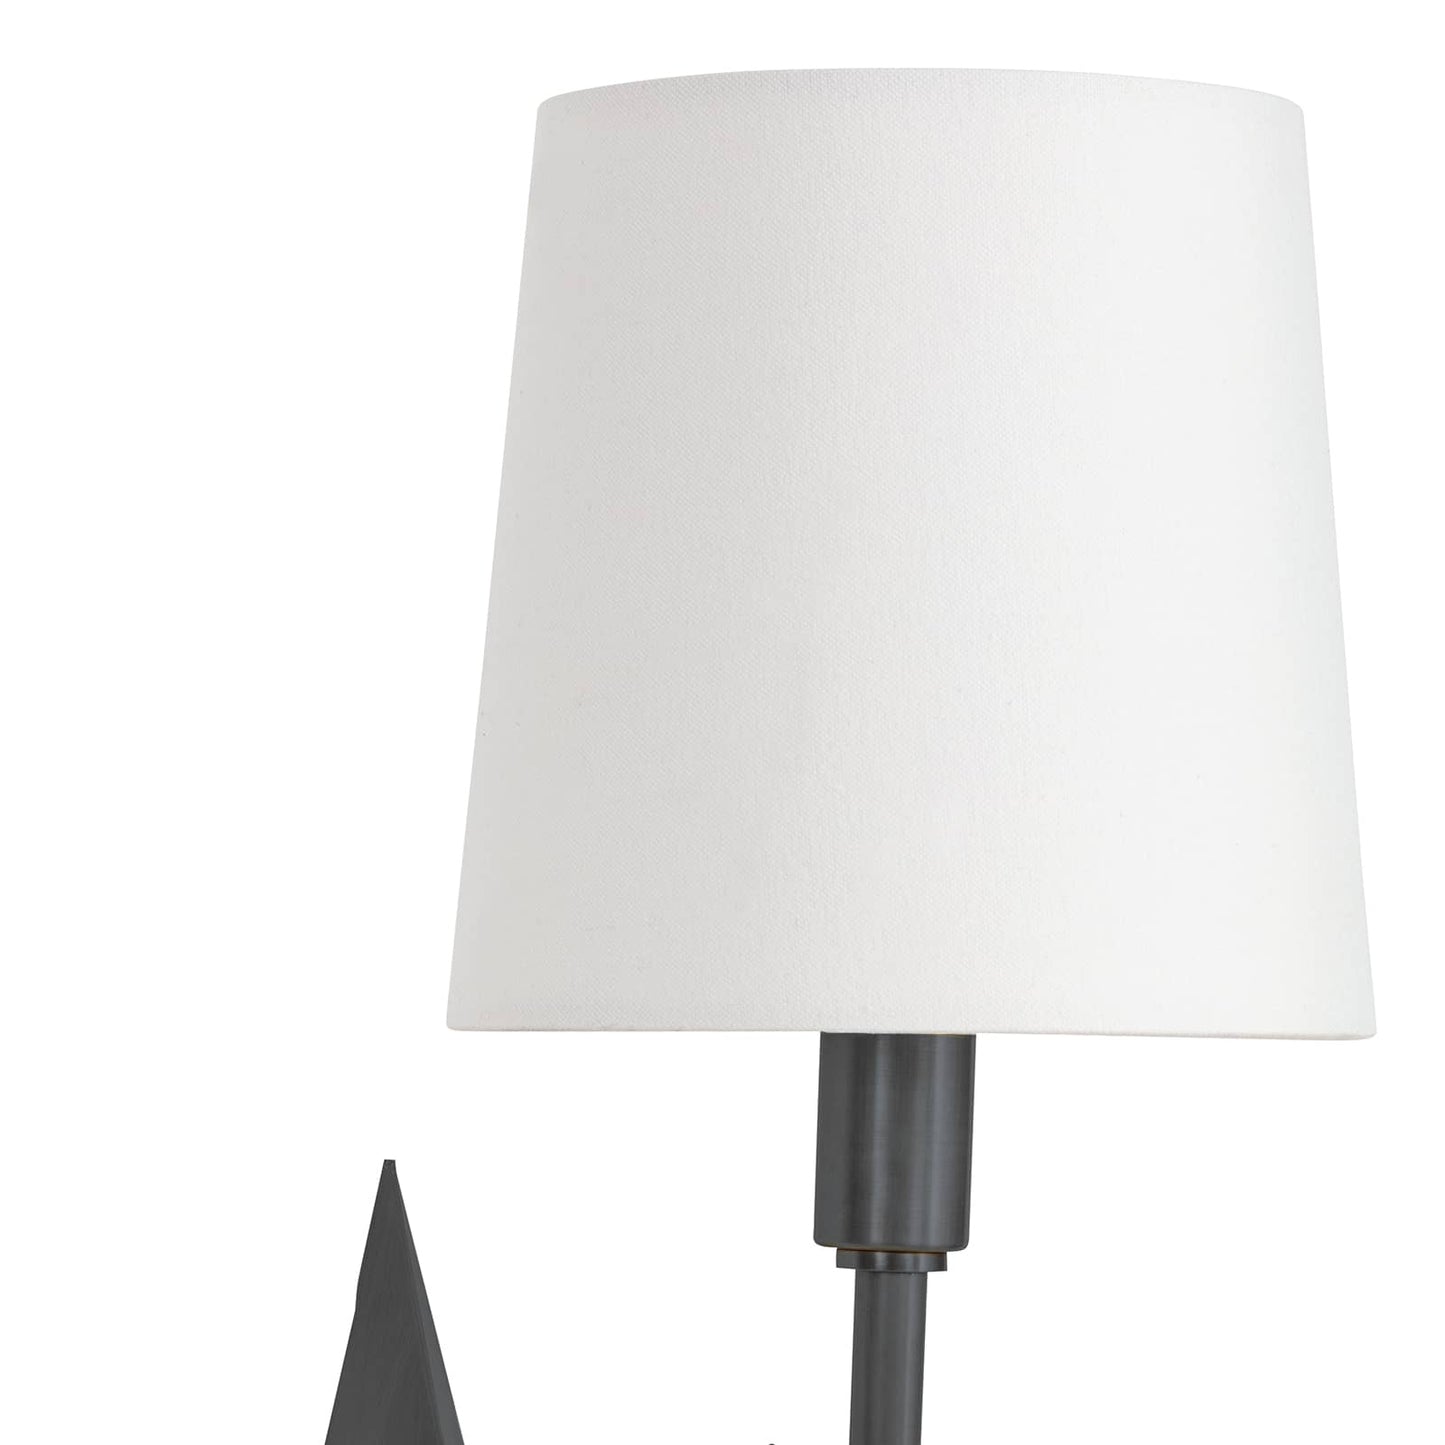 Etoile Sconce in Oil Rubbed Bronze by Coastal Living